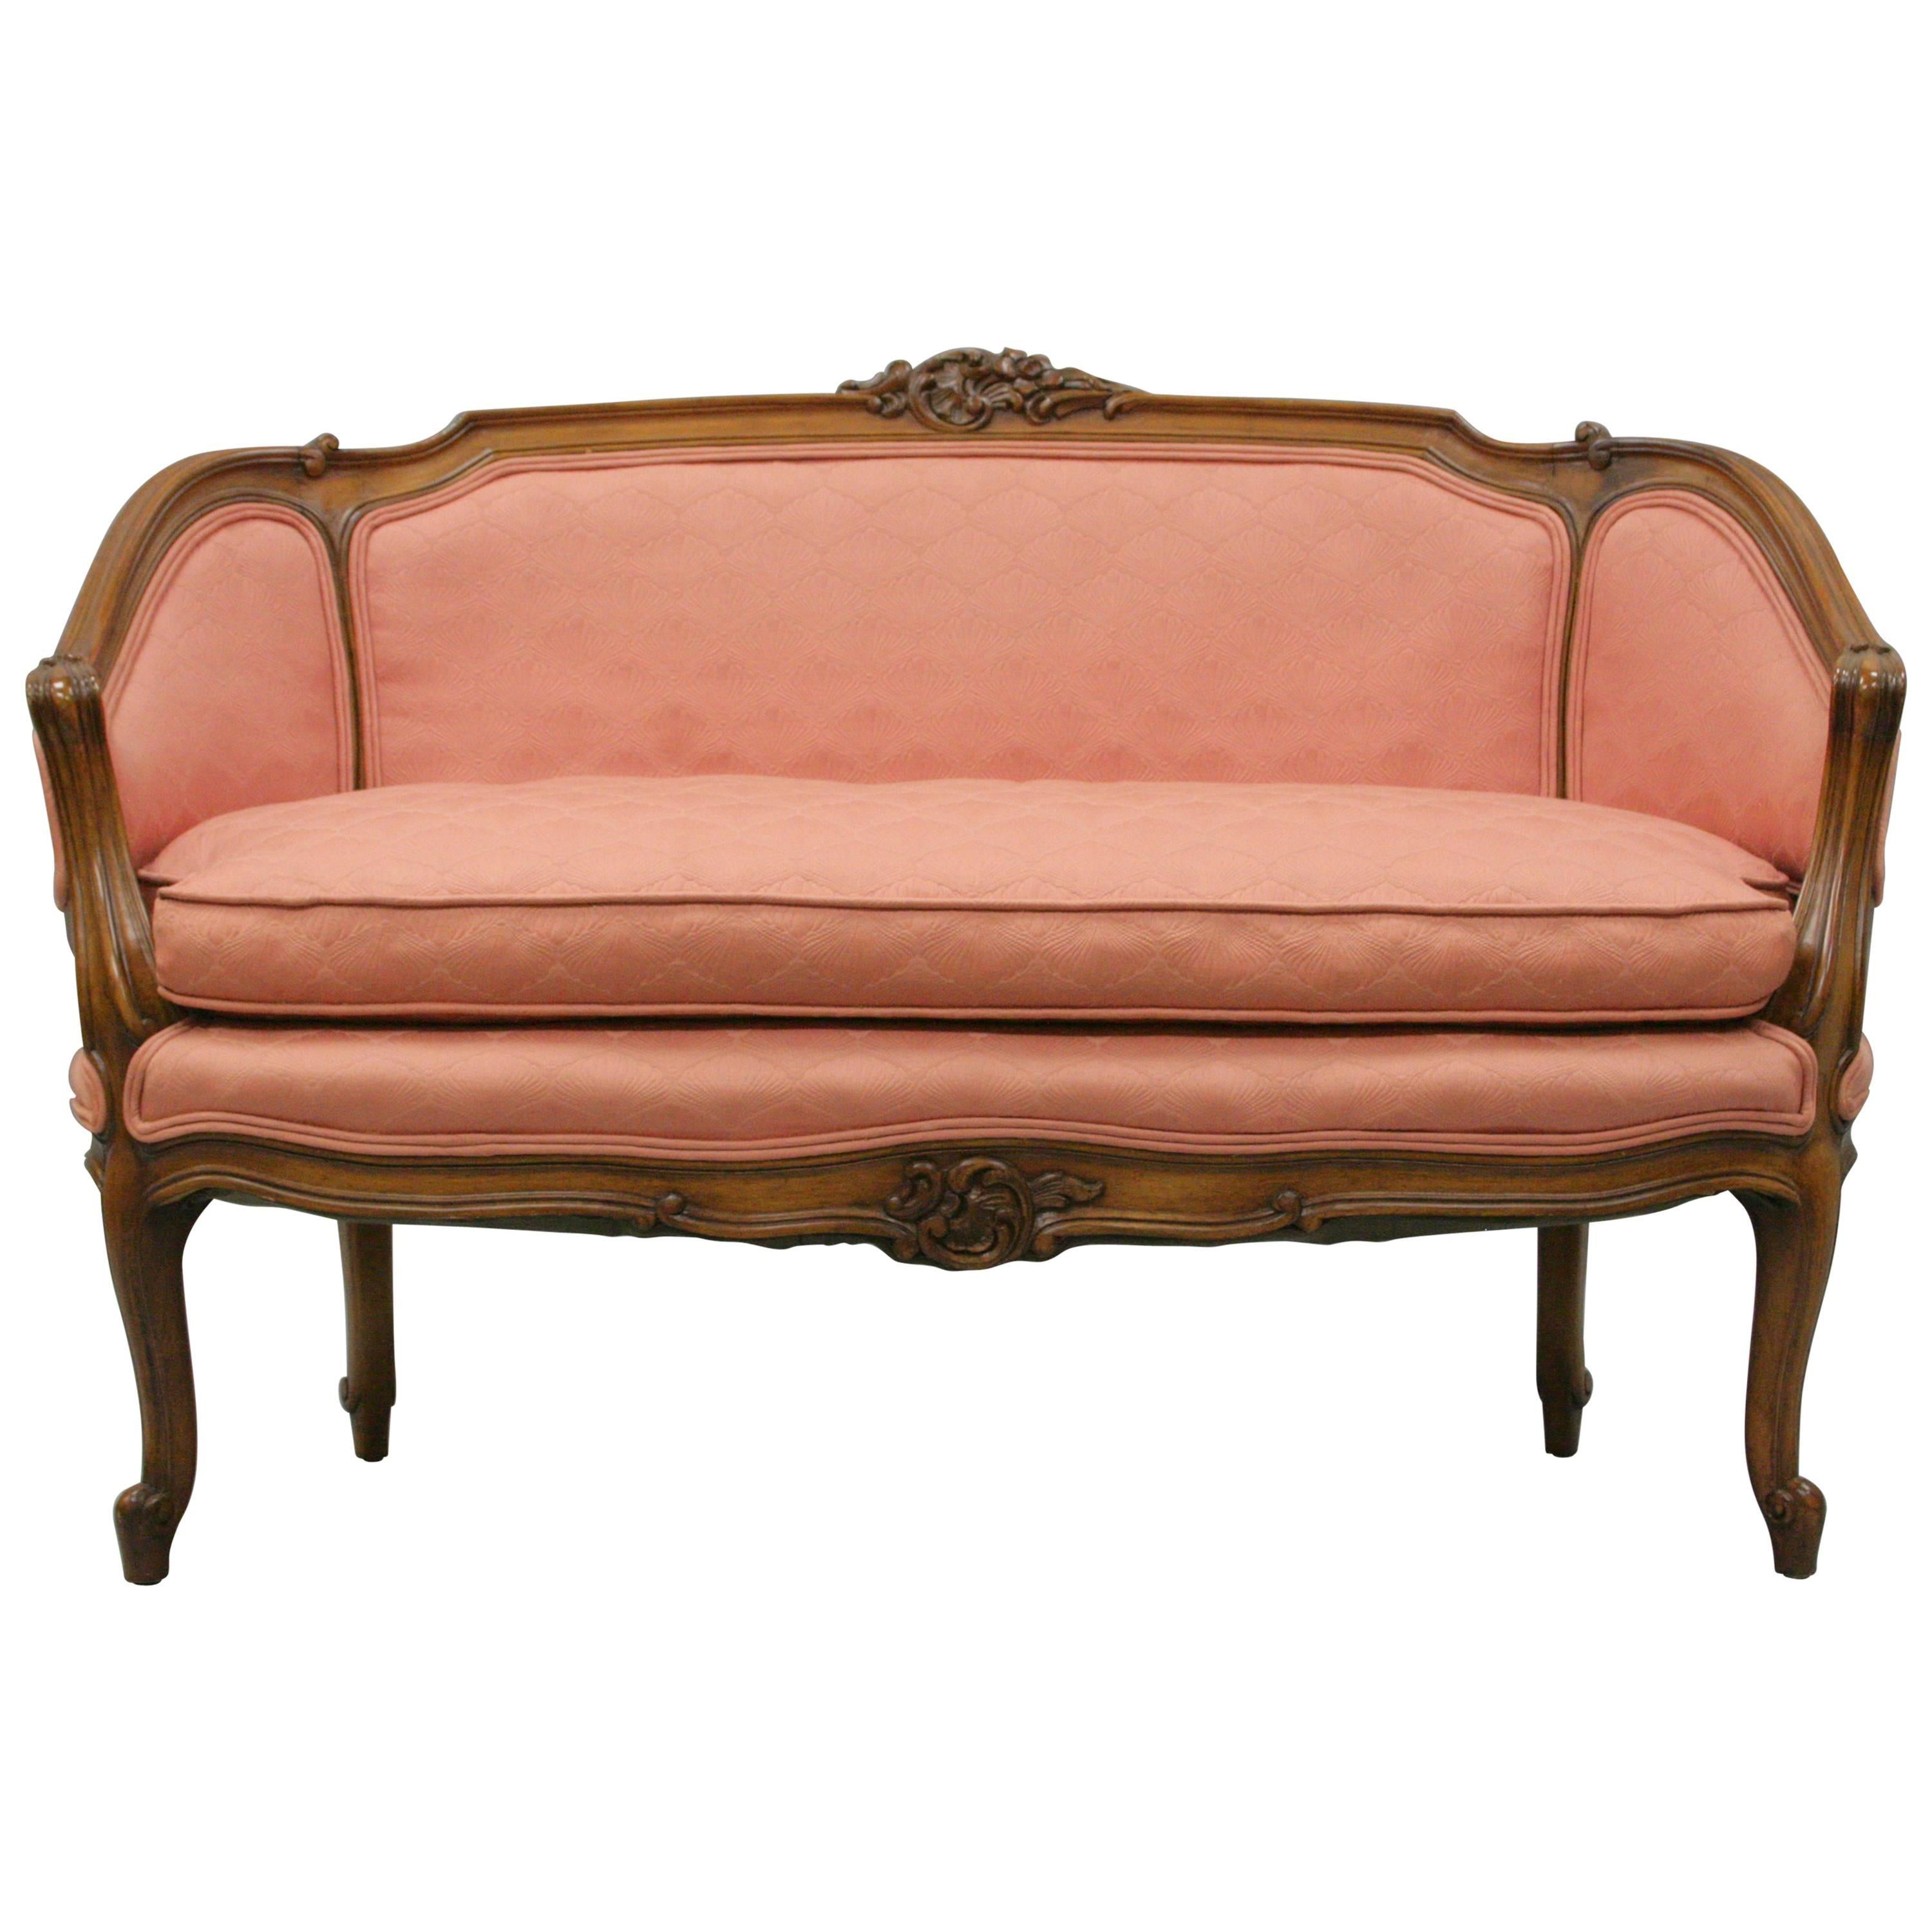 Small French Country Louis XV Style Carved Walnut Pink Settee Loveseat Sofa